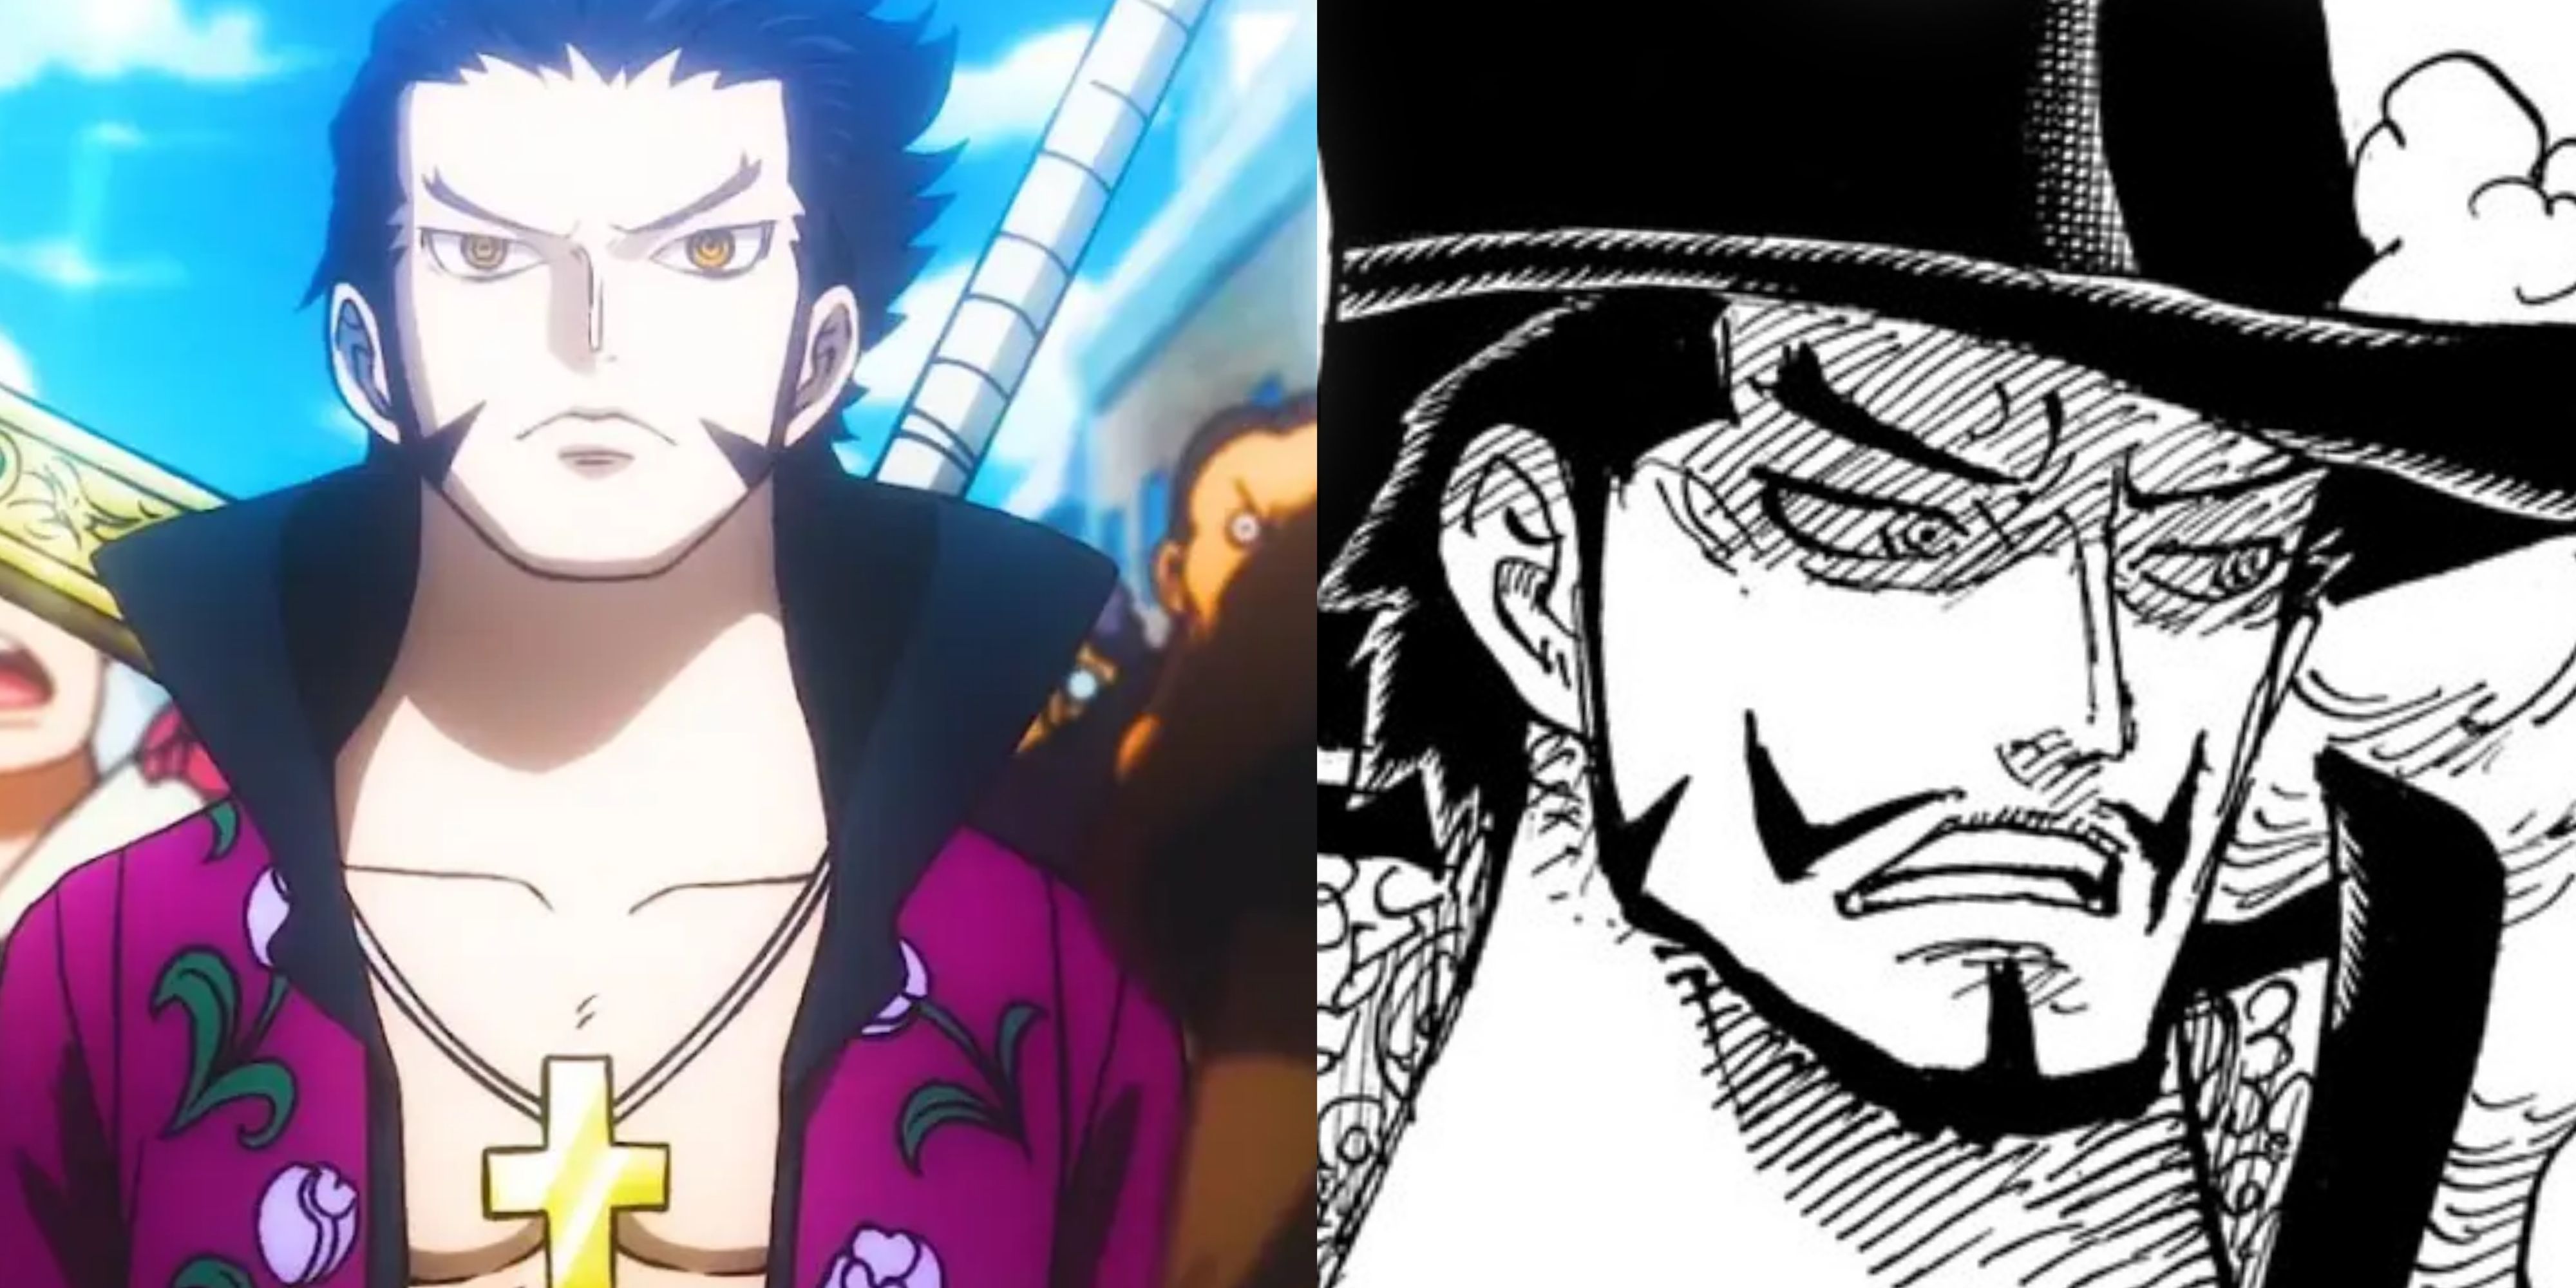 MIHAWK IS THE TRUTH- One Piece 1058 